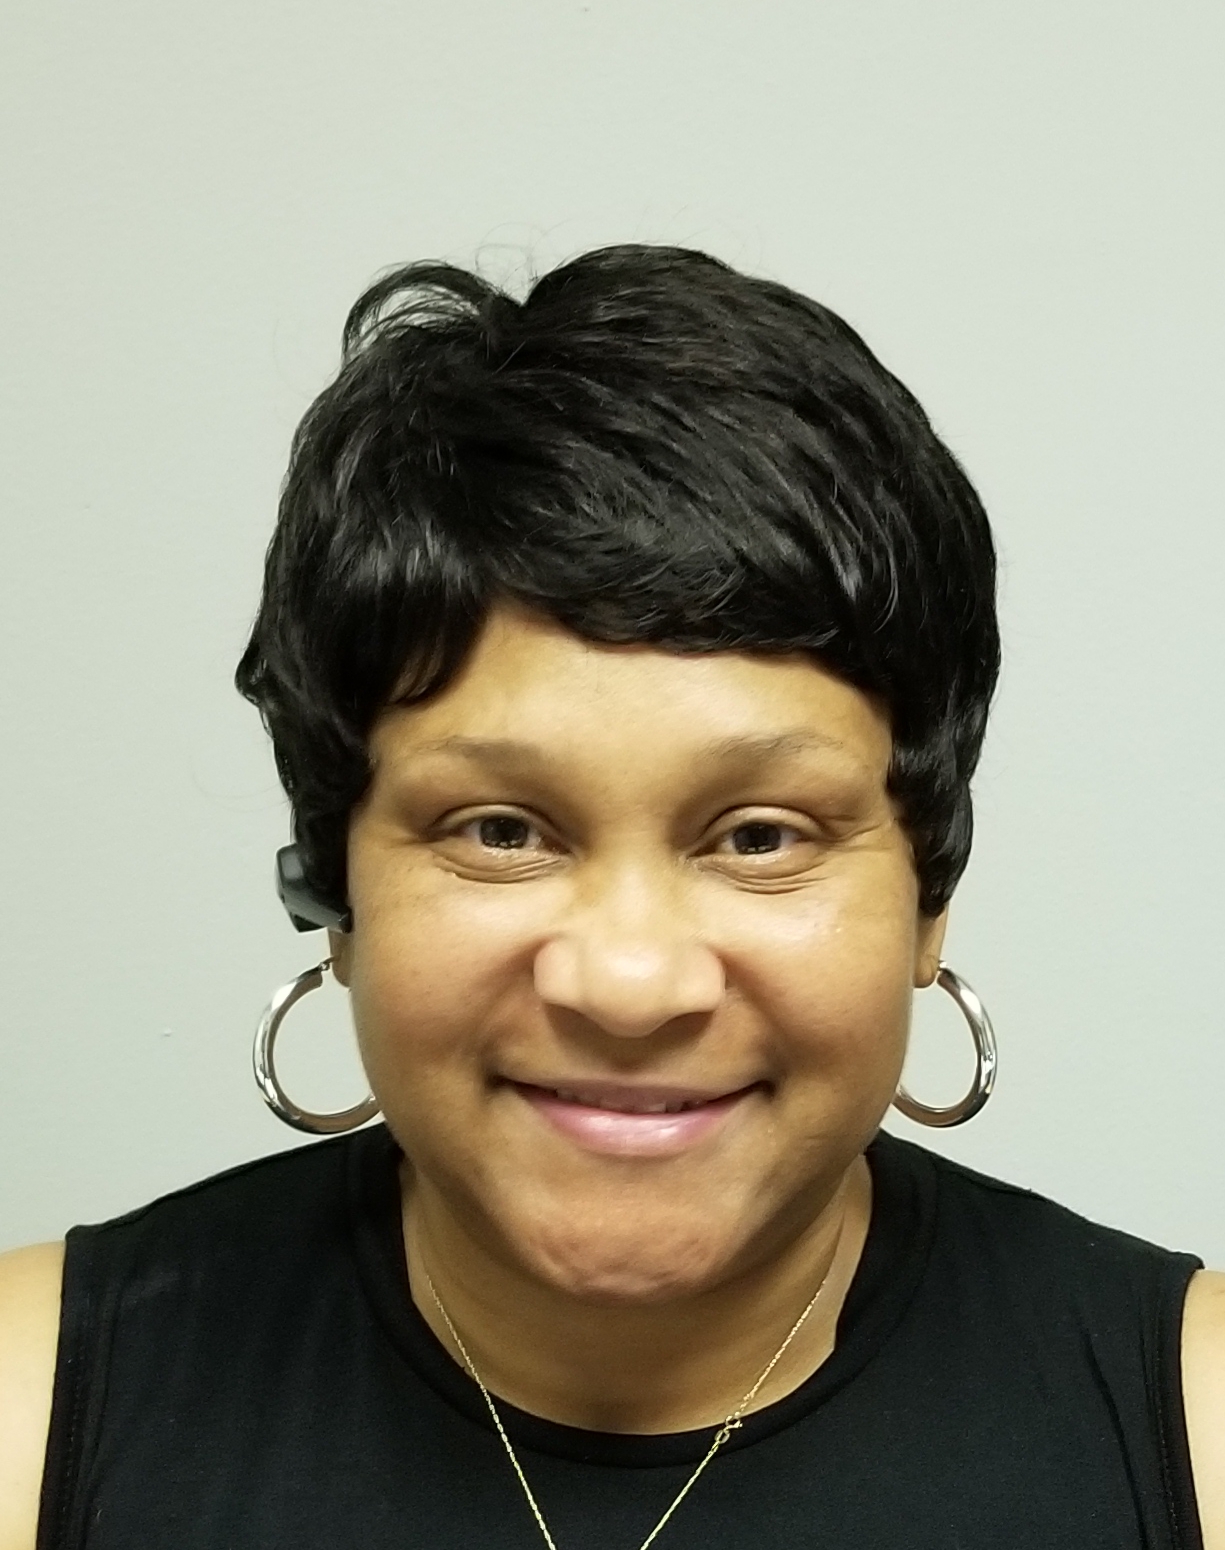 Caregiver Houston TX - Hearts at Home Caregiver of the Month!